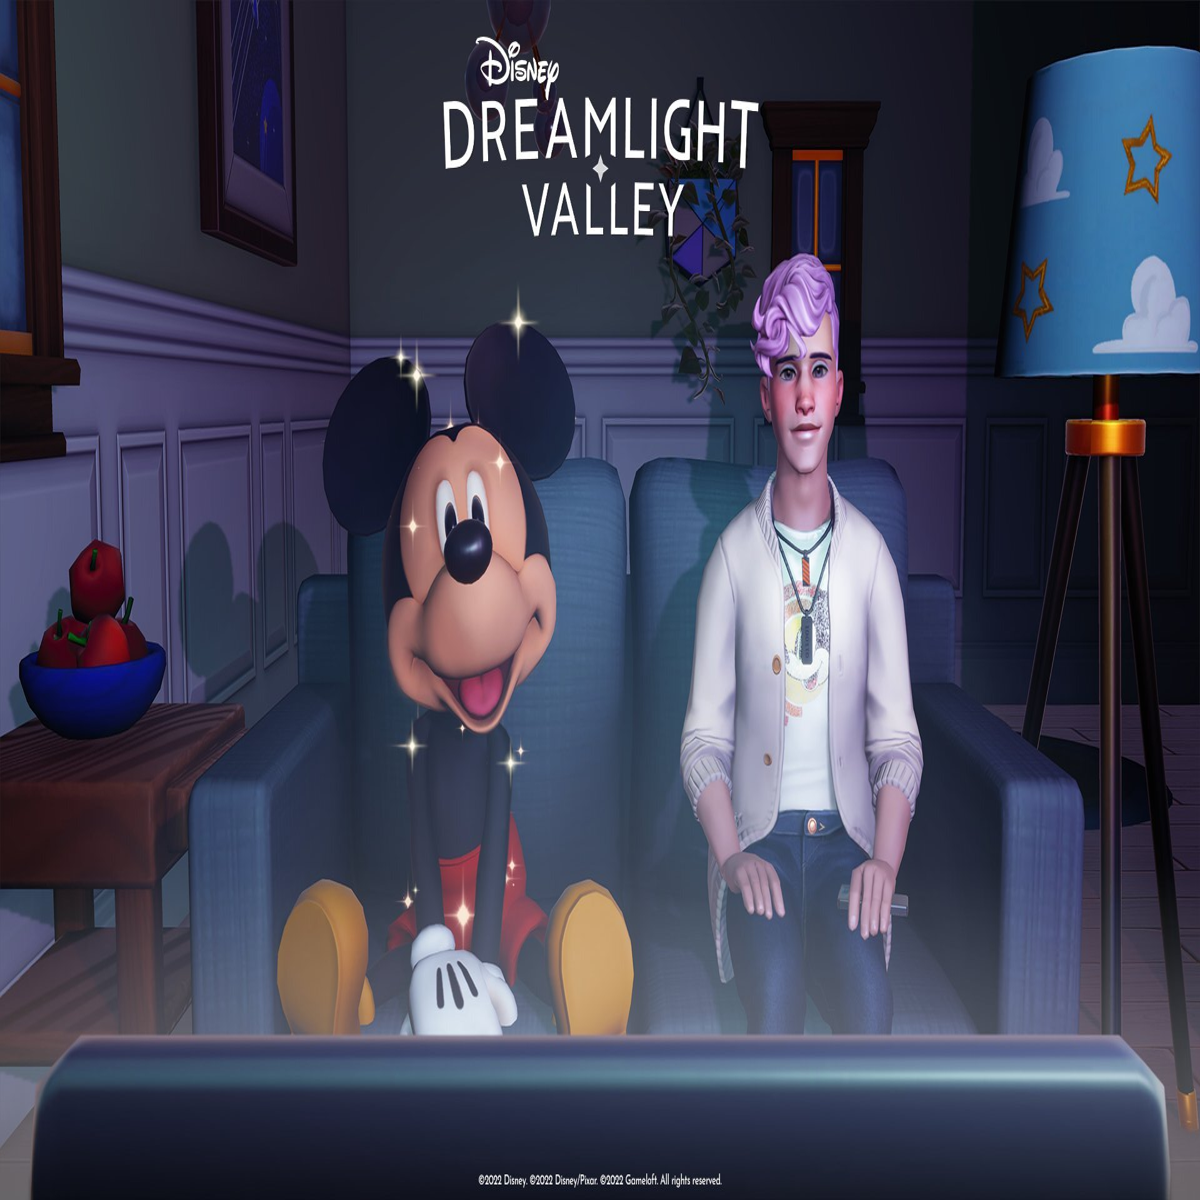 Disney Dreamlight Valley comes to Game Pass with Metal: Hellsinger